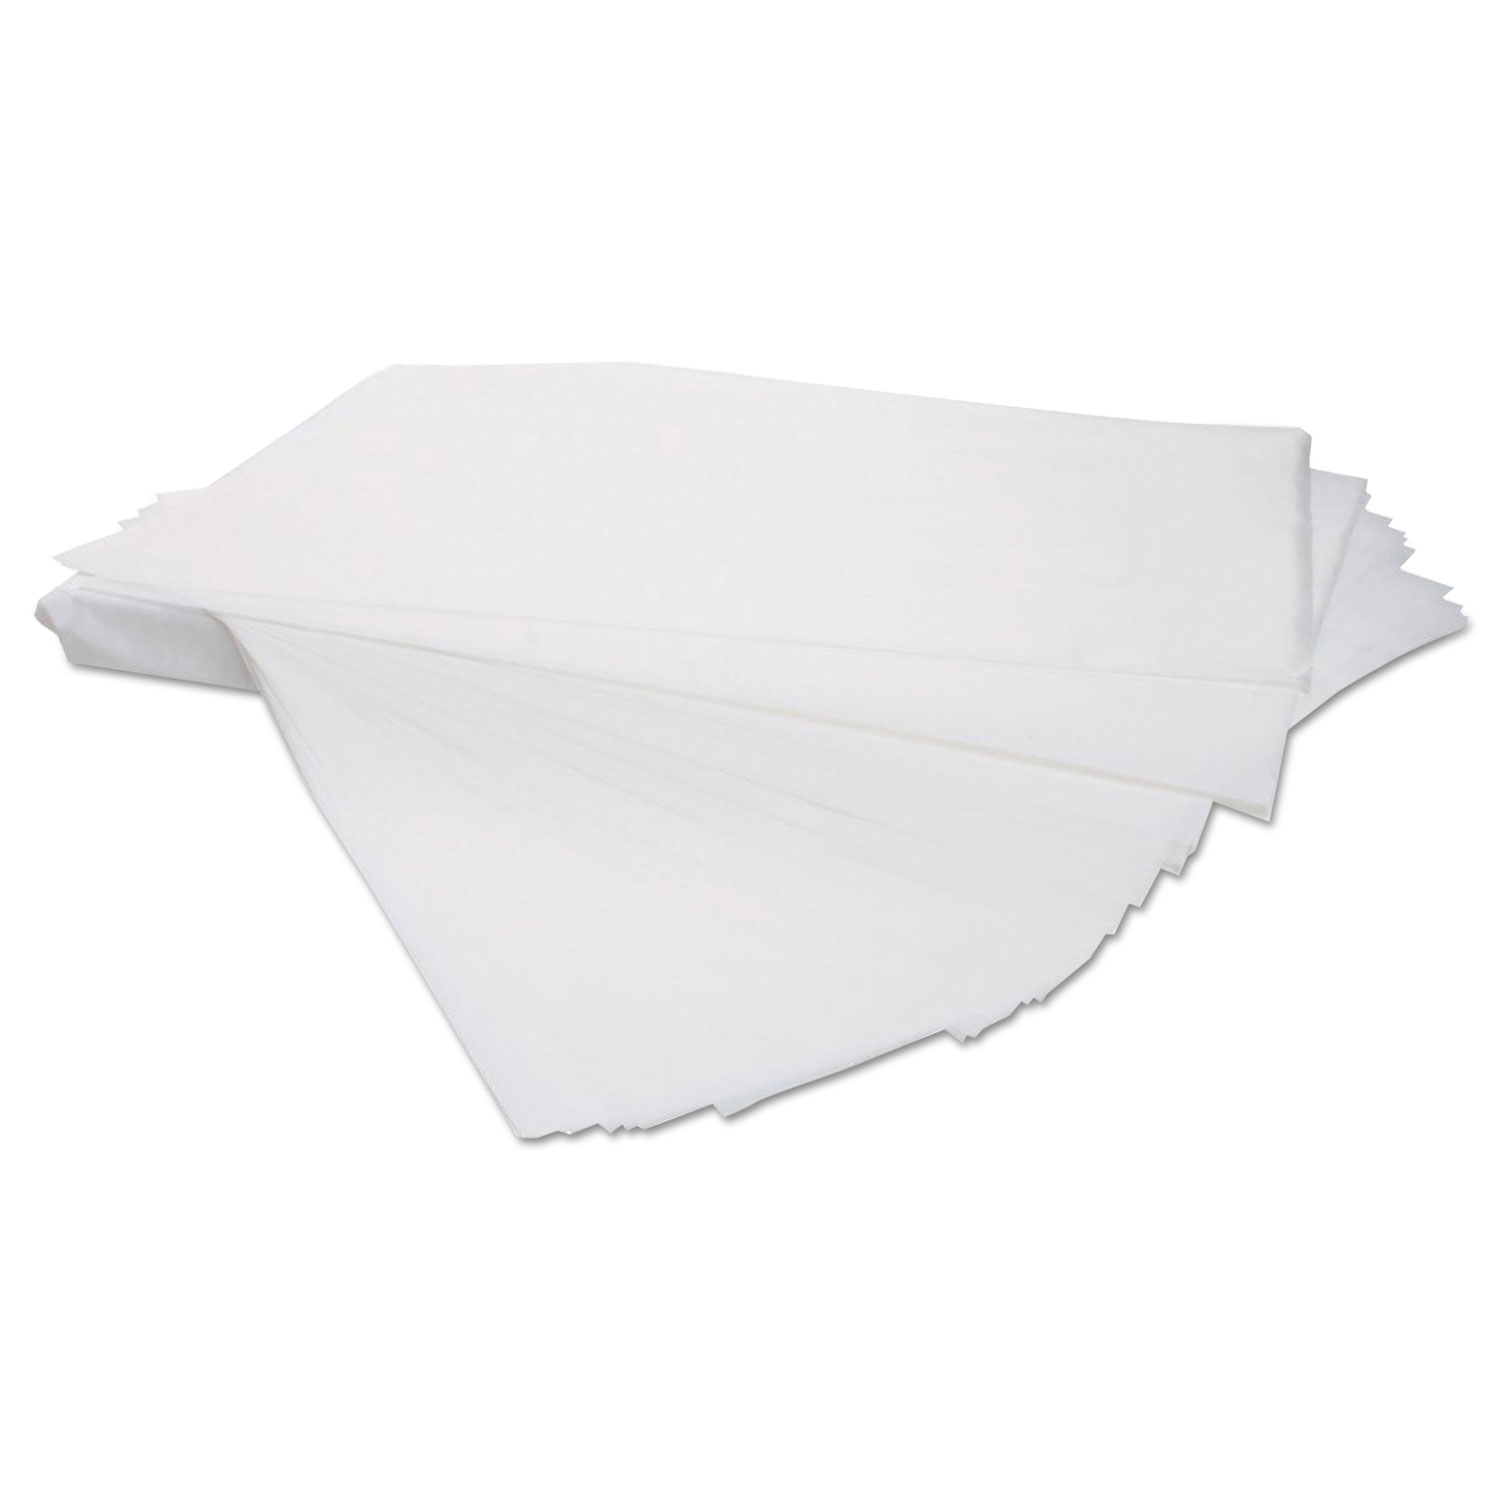 Newspaper-Grade Paper Sheets, Uncoated, 60lb, 24 x 36, White, 800 Sheets/Box